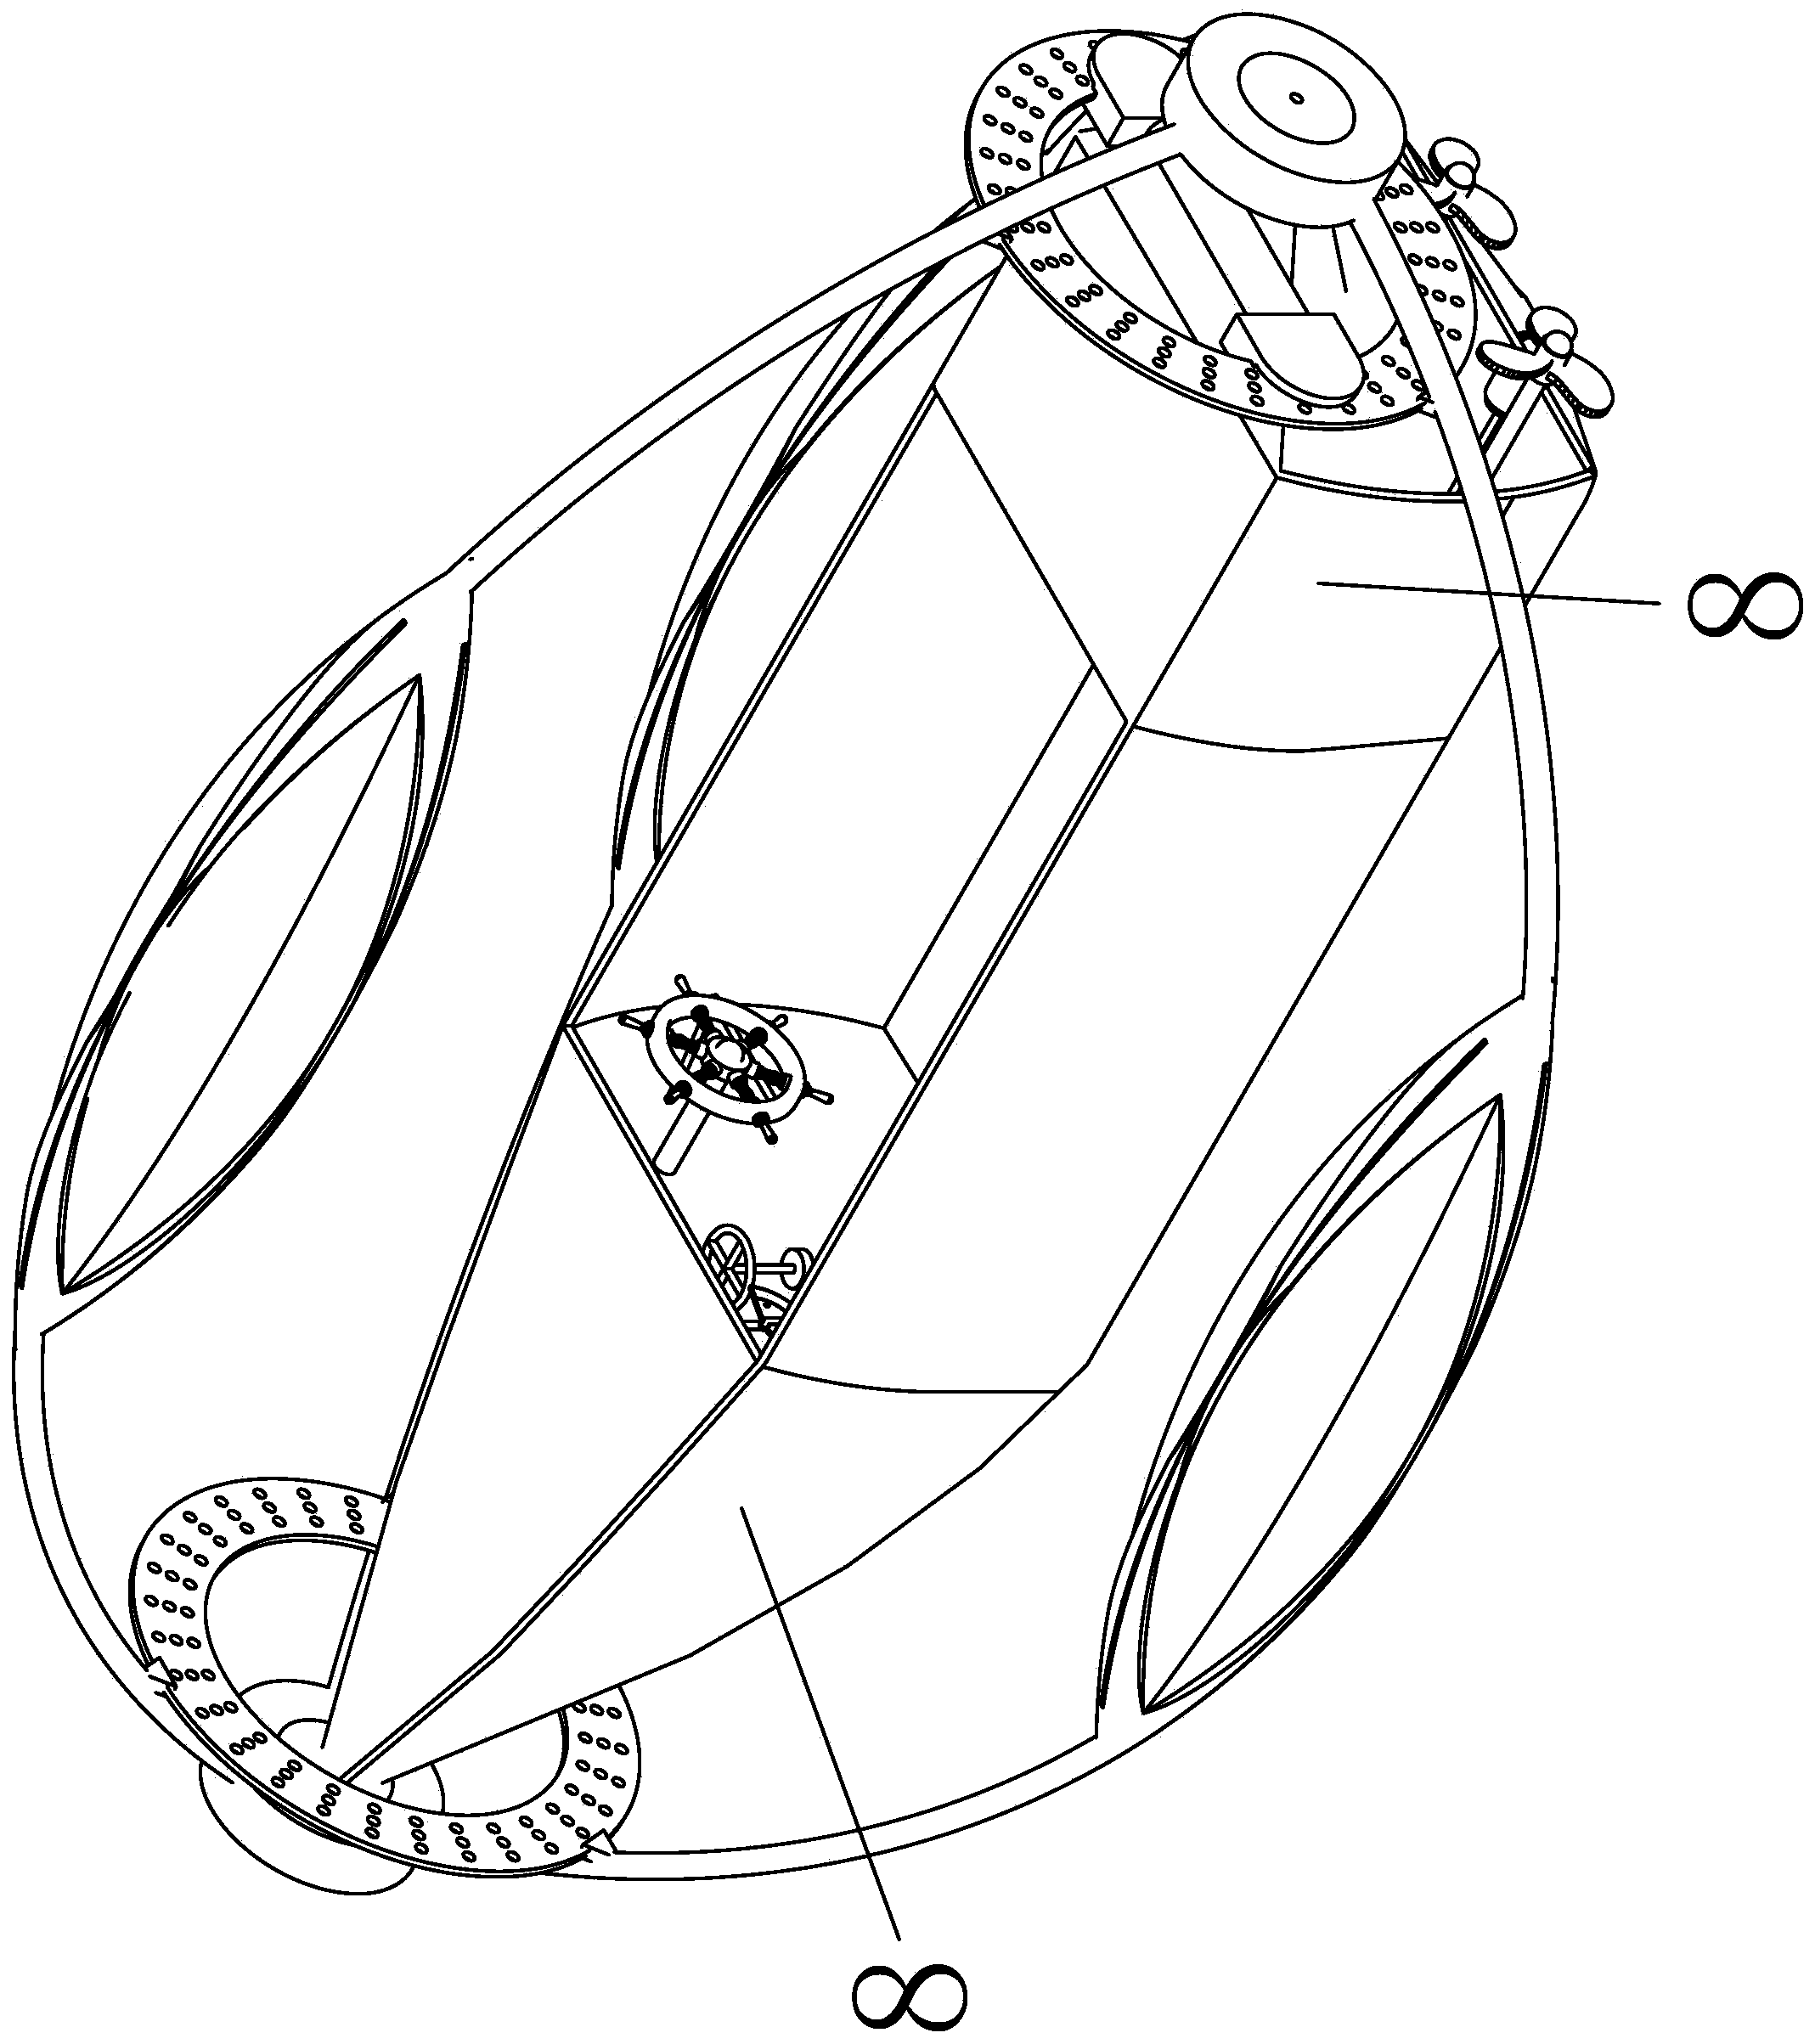 Non-capsizable ship with triangle auxiliary floating body